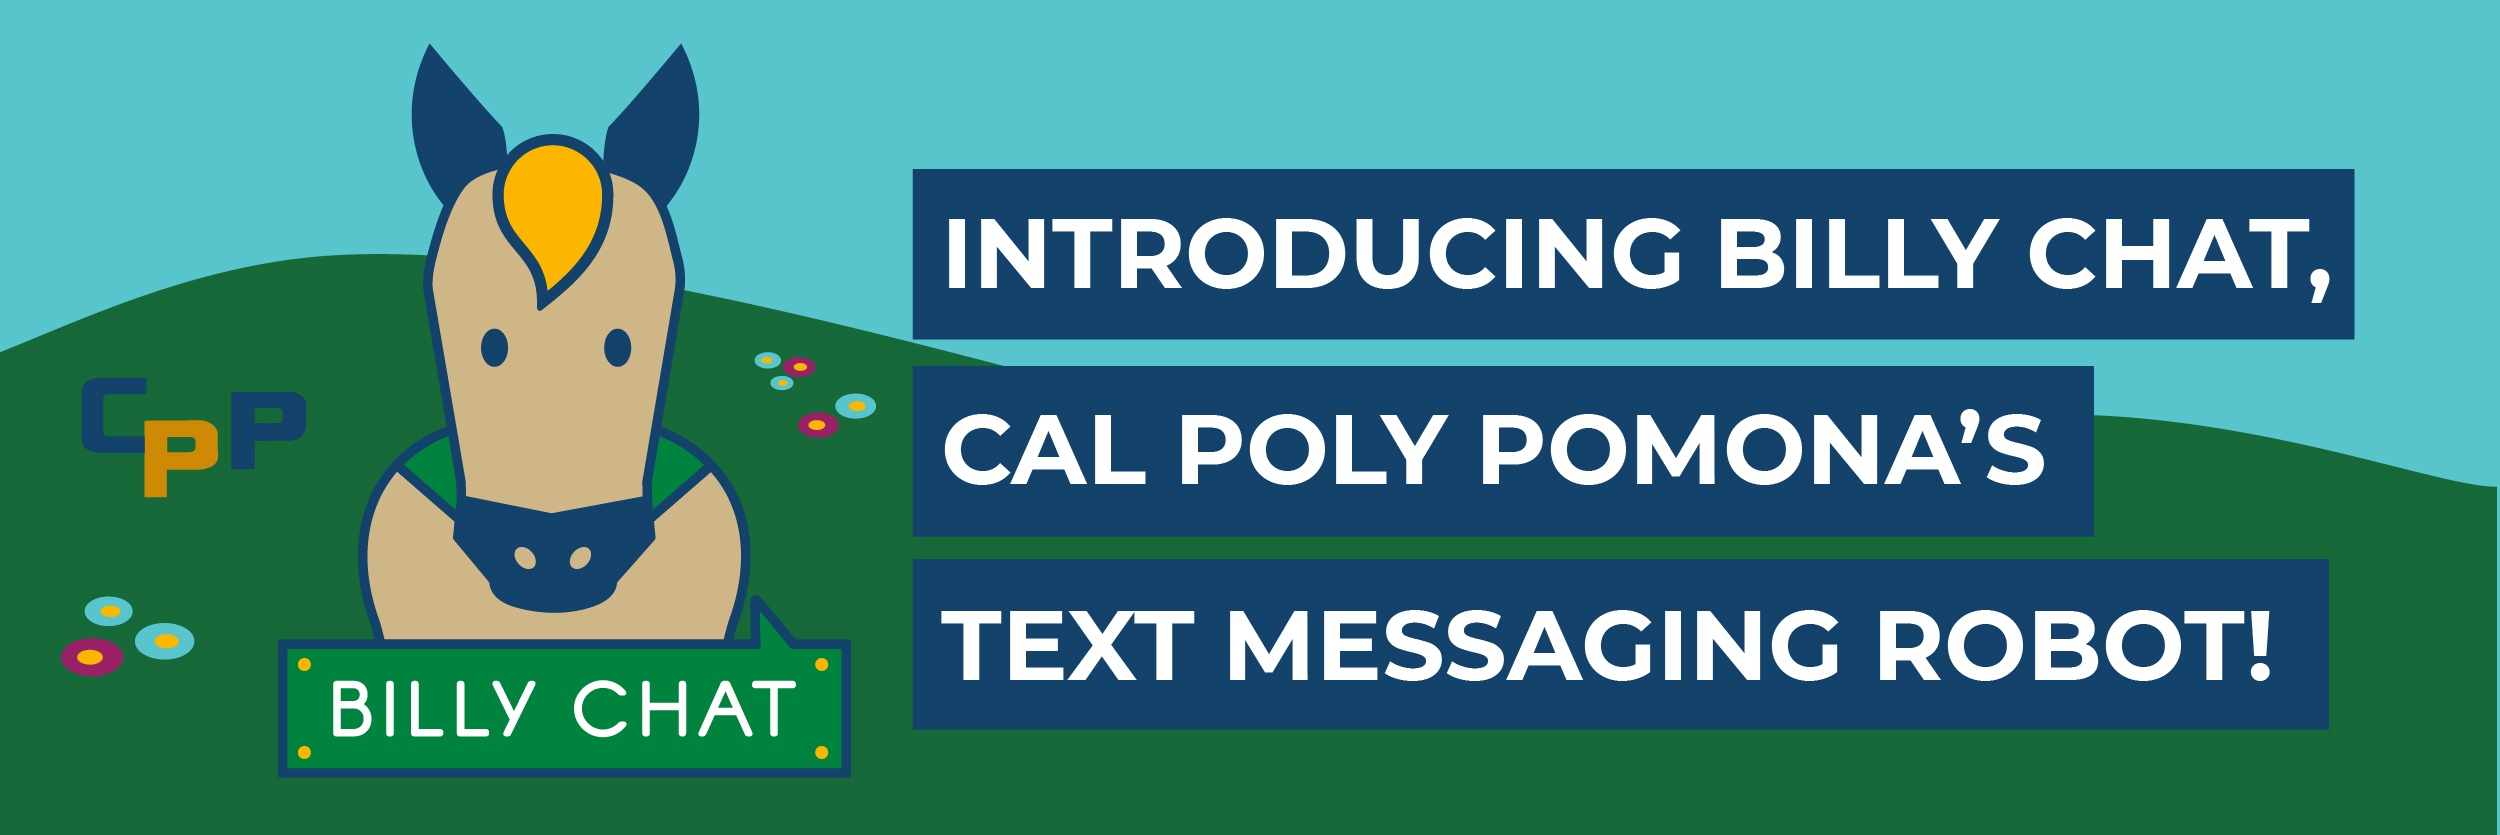 Billy Chat logo with the words "Introducing Billy Chat, Cal Poly Pomona's text messaging robot!" with a paper airplane flying in the background